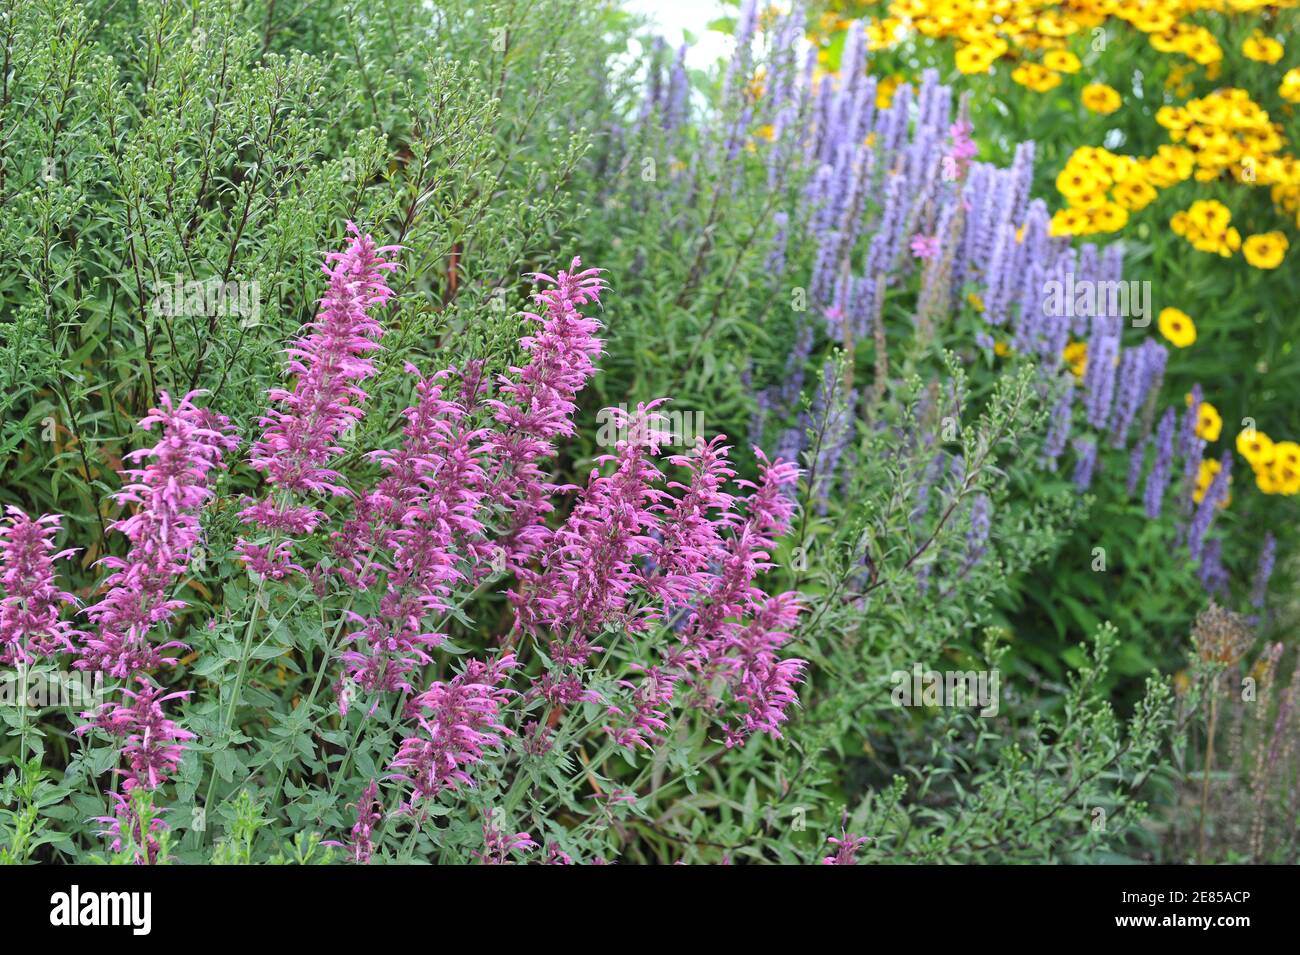 Agastache Acapulco Purple blooms in a garden in August with Agastache Blue Fortune and yellow Sneezeweed (Helenium) at background Stock Photo